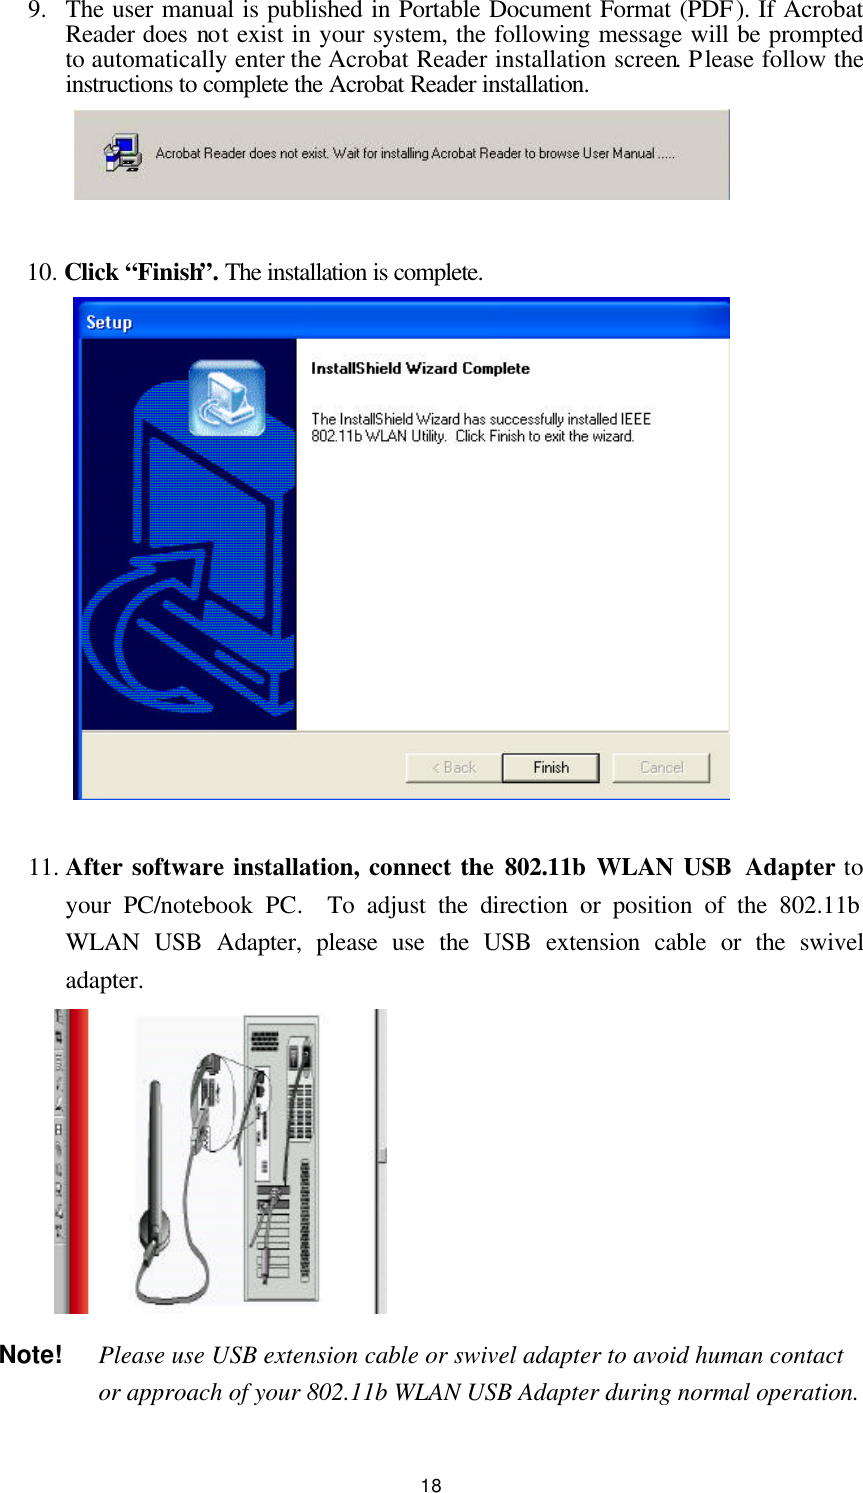  18 9.  The user manual is published in Portable Document Format (PDF). If Acrobat Reader does not exist in your system, the following message will be prompted to automatically enter the Acrobat Reader installation screen. Please follow the instructions to complete the Acrobat Reader installation.     10. Click “Finish”. The installation is complete.                11. After software installation, connect the 802.11b WLAN USB  Adapter to your PC/notebook PC.  To adjust the direction or position of the 802.11b WLAN USB Adapter, please use the USB extension cable or the swivel adapter.          Note!  Please use USB extension cable or swivel adapter to avoid human contact or approach of your 802.11b WLAN USB Adapter during normal operation.  